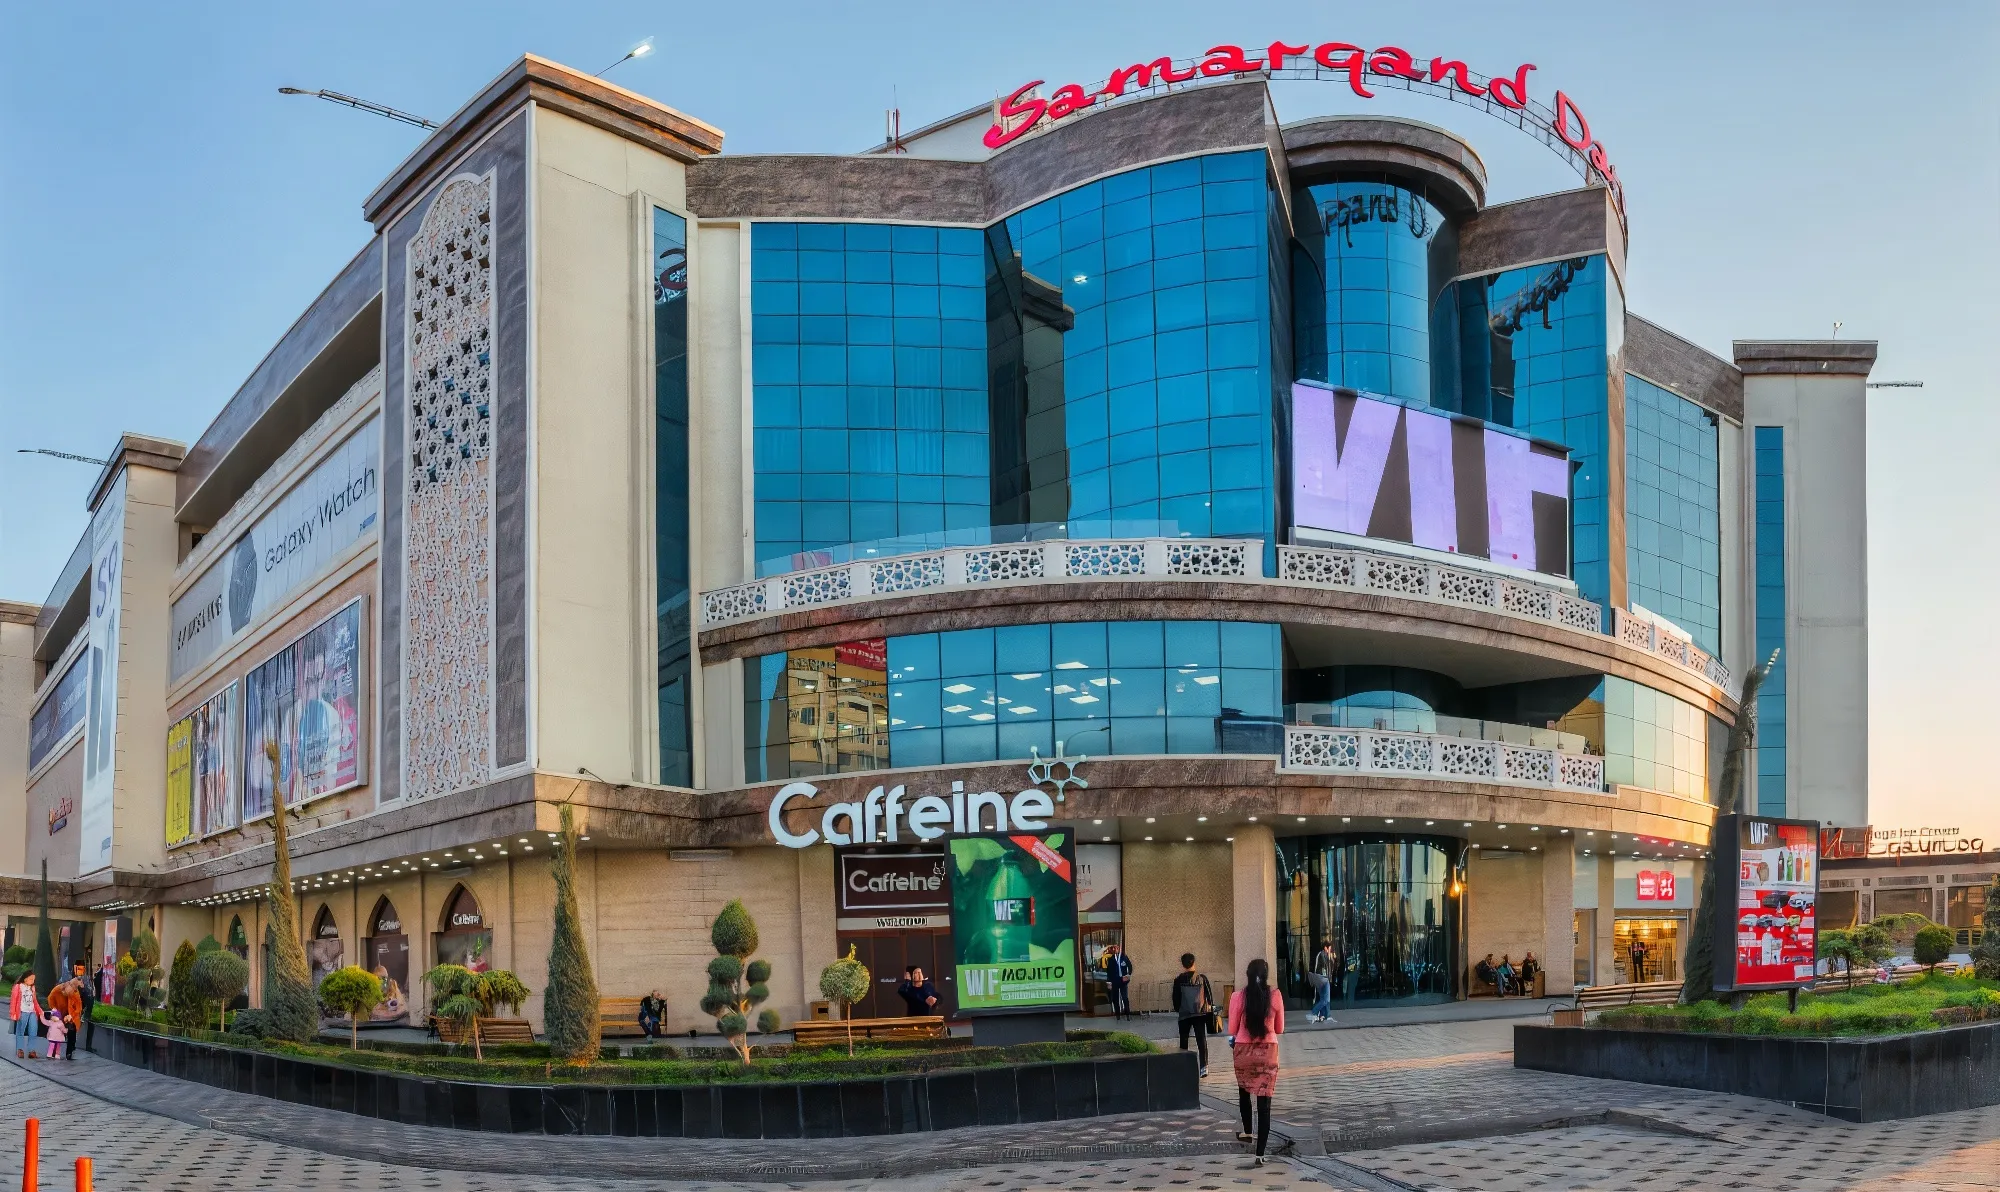 Samarqand Darvoza Mall in Uzbekistan, central_asia | Shoes,Souvenirs,Accessories,Clothes,Natural Beauty Products,Cosmetics,Sportswear - Country Helper